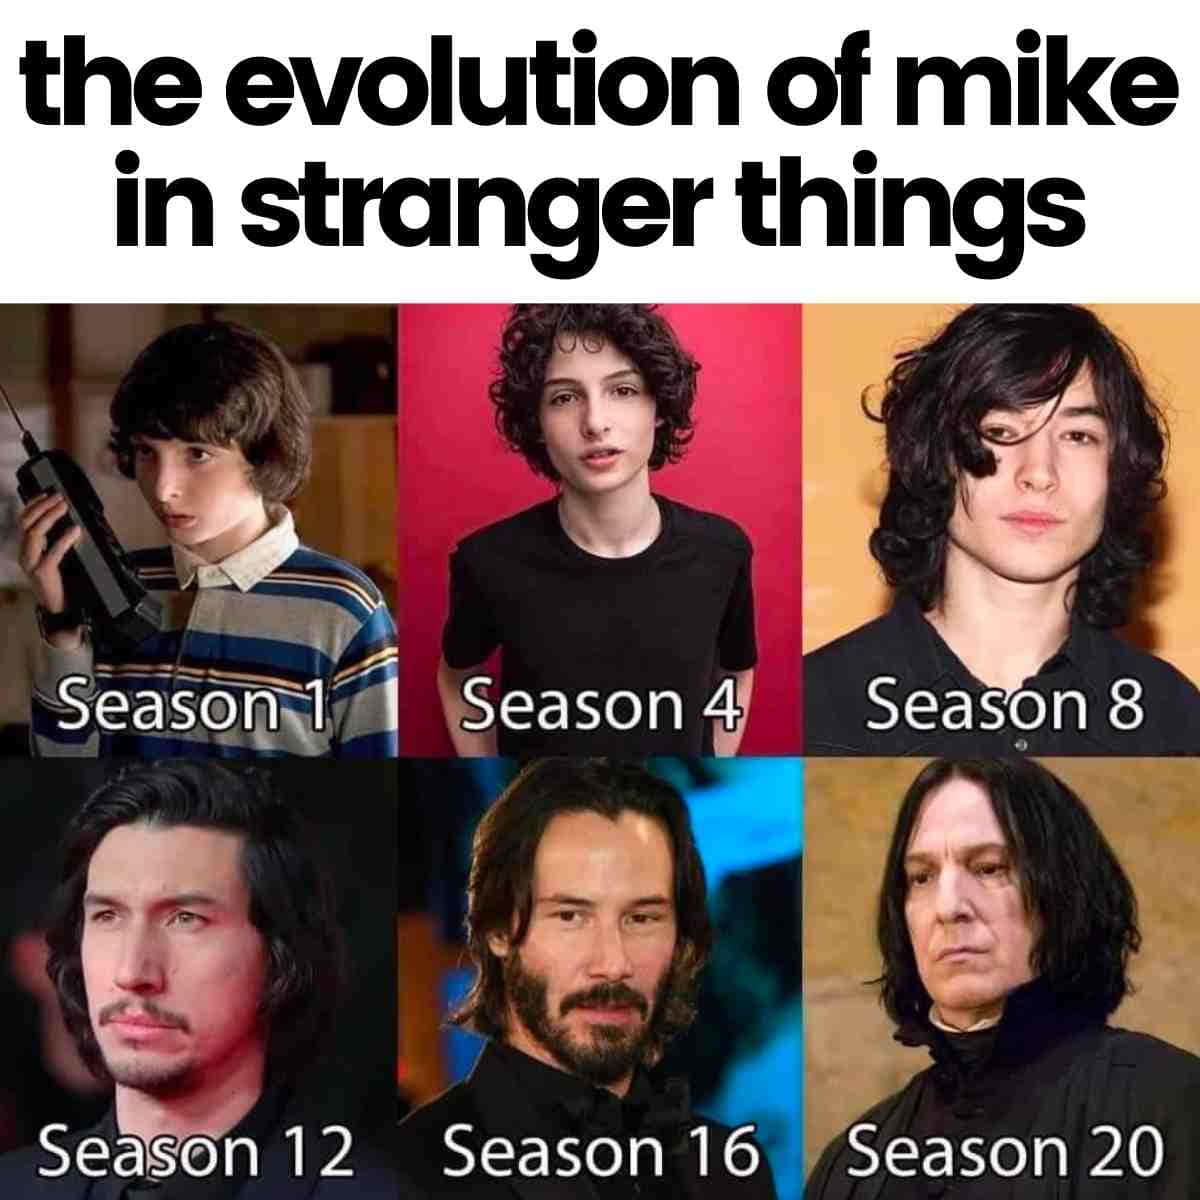 Mike Stranger Things Funny Evolution Picture